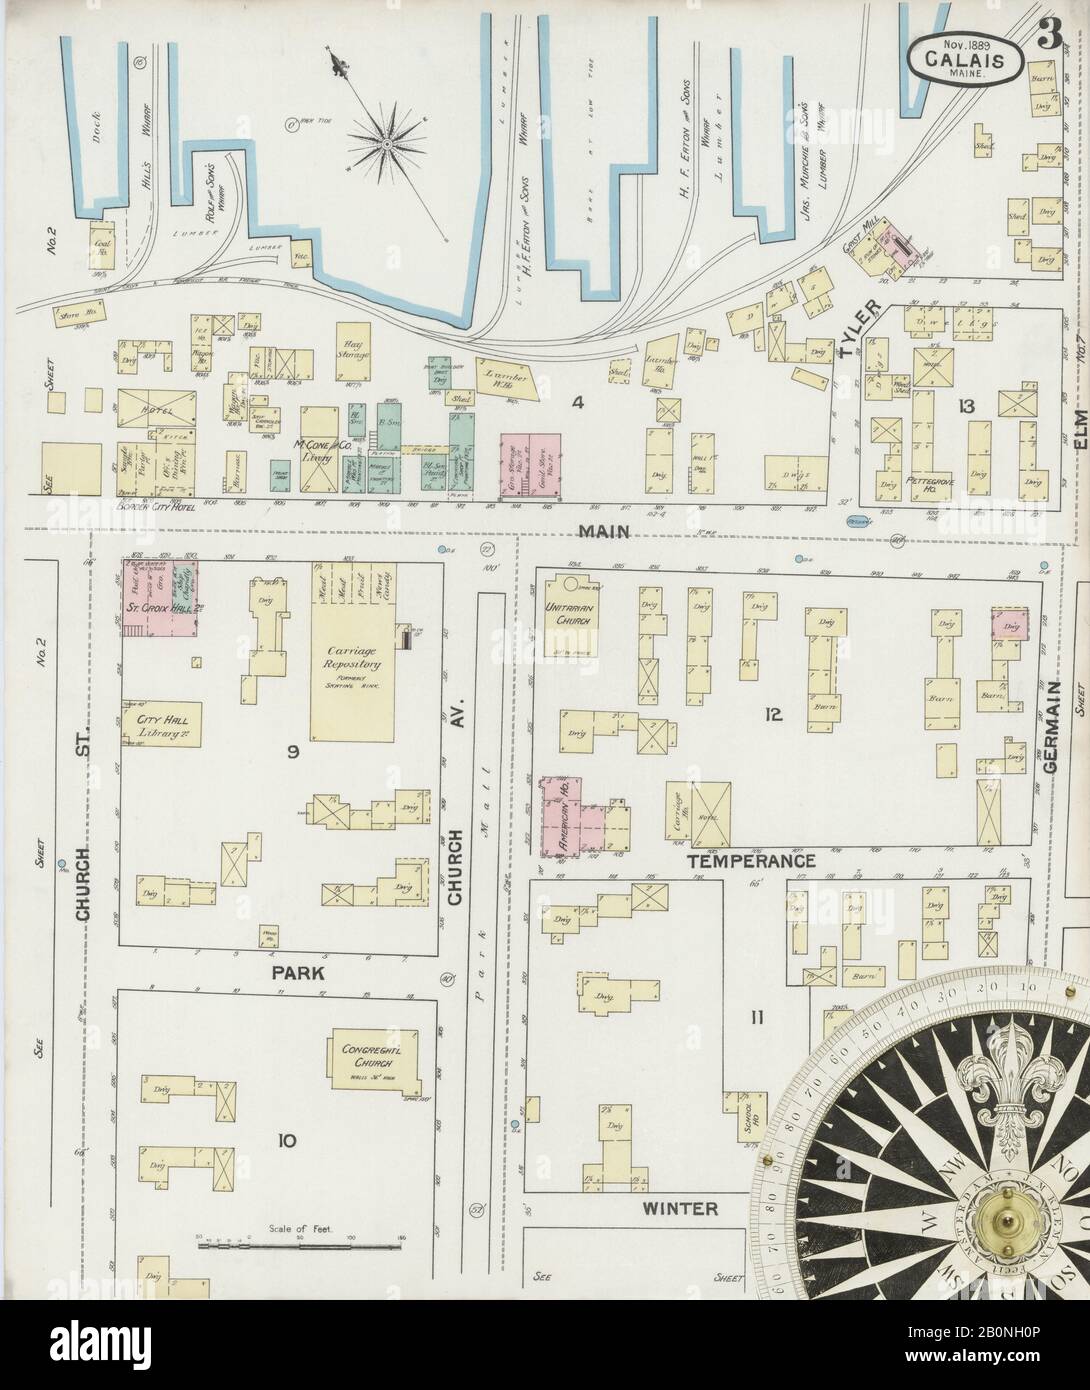 Image 3 of Sanborn Fire Insurance Map from Calais, Washington County, Maine. Nov 1889. 8 Sheet(s), America, street map with a Nineteenth Century compass Stock Photo